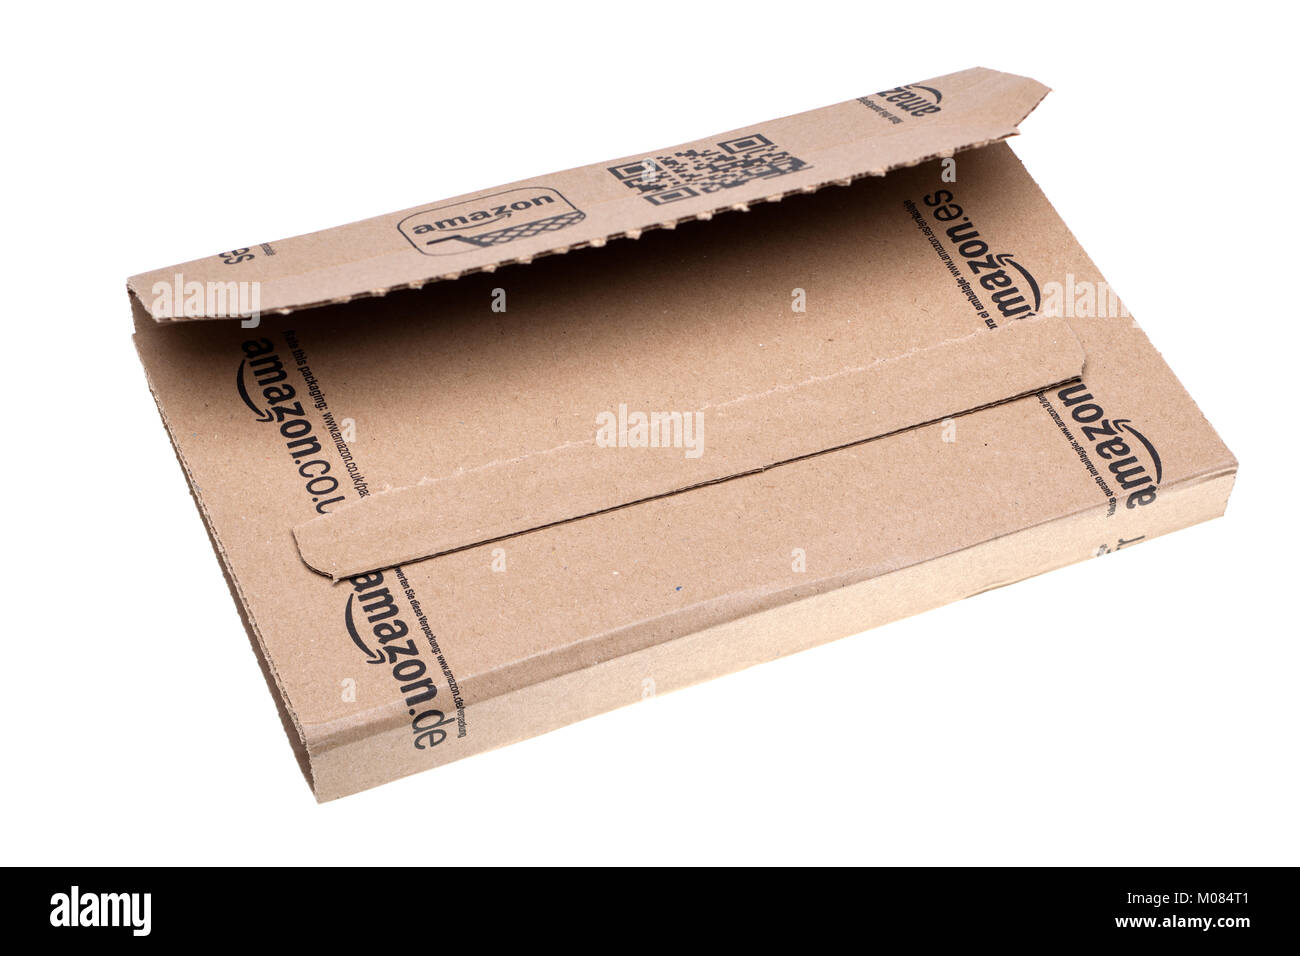 Amazon box Cut Out Stock Images & Pictures - Alamy